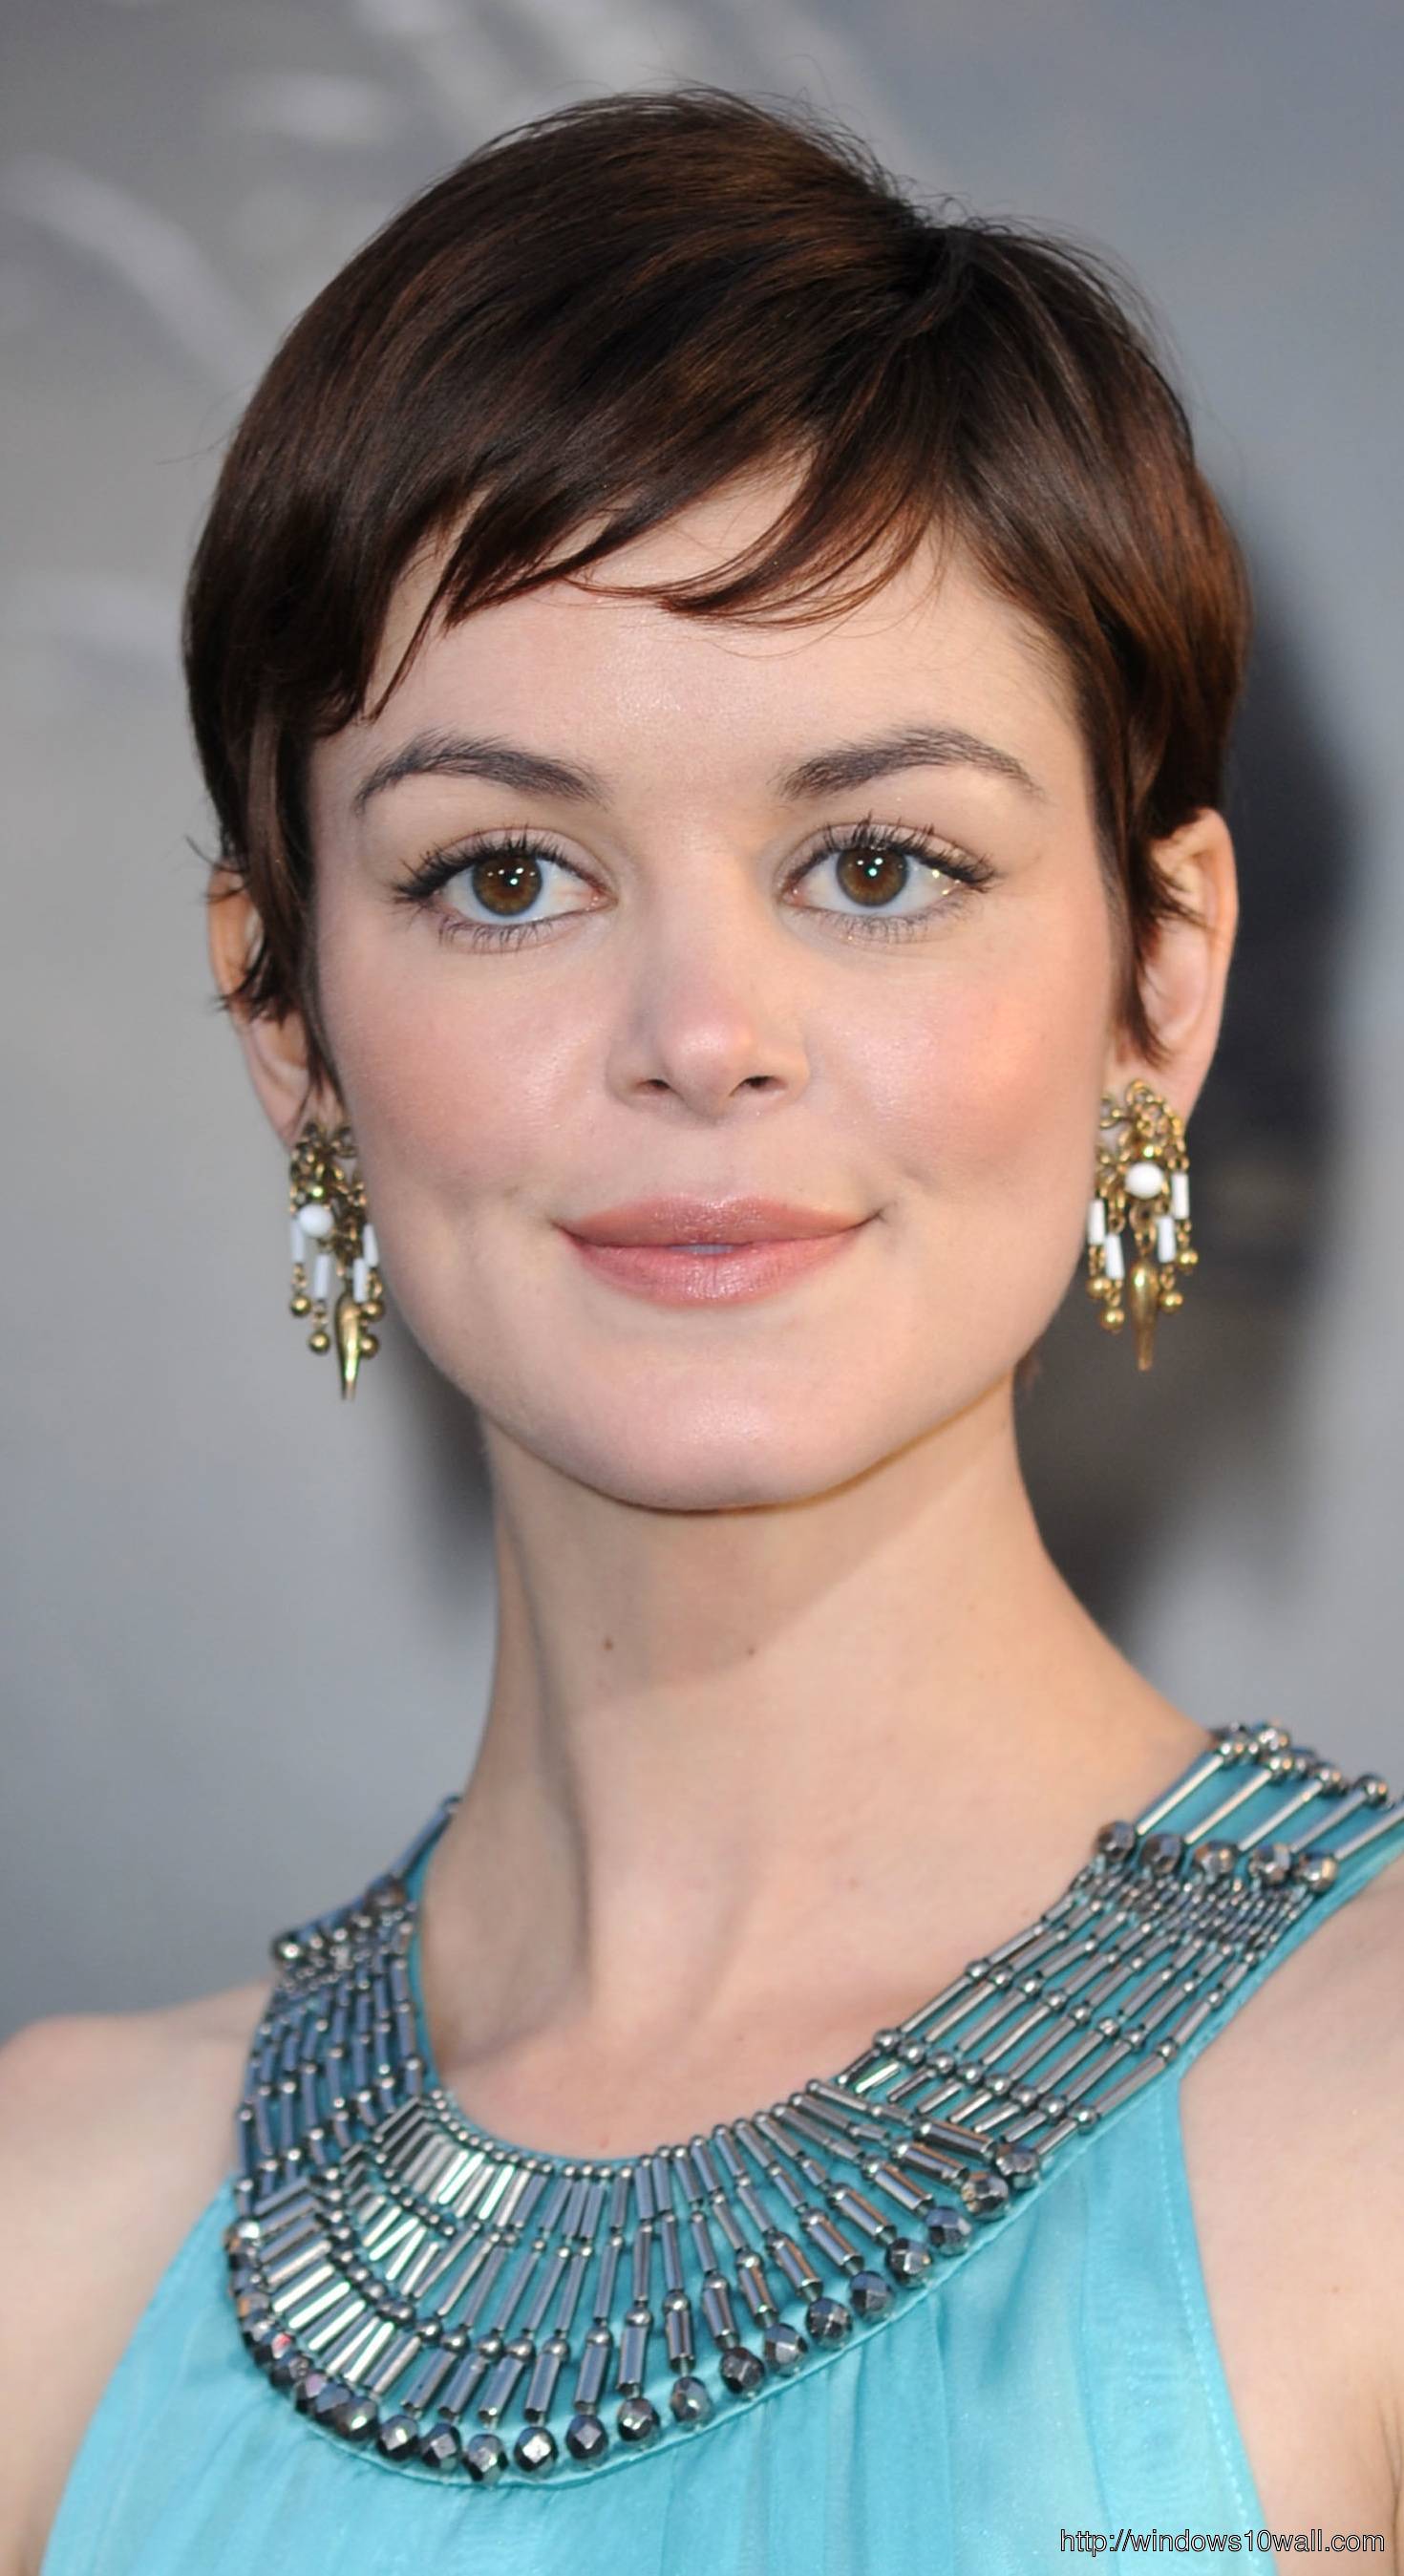 pixie-cut-hairstyle-for-round-faces-background-wallpaper